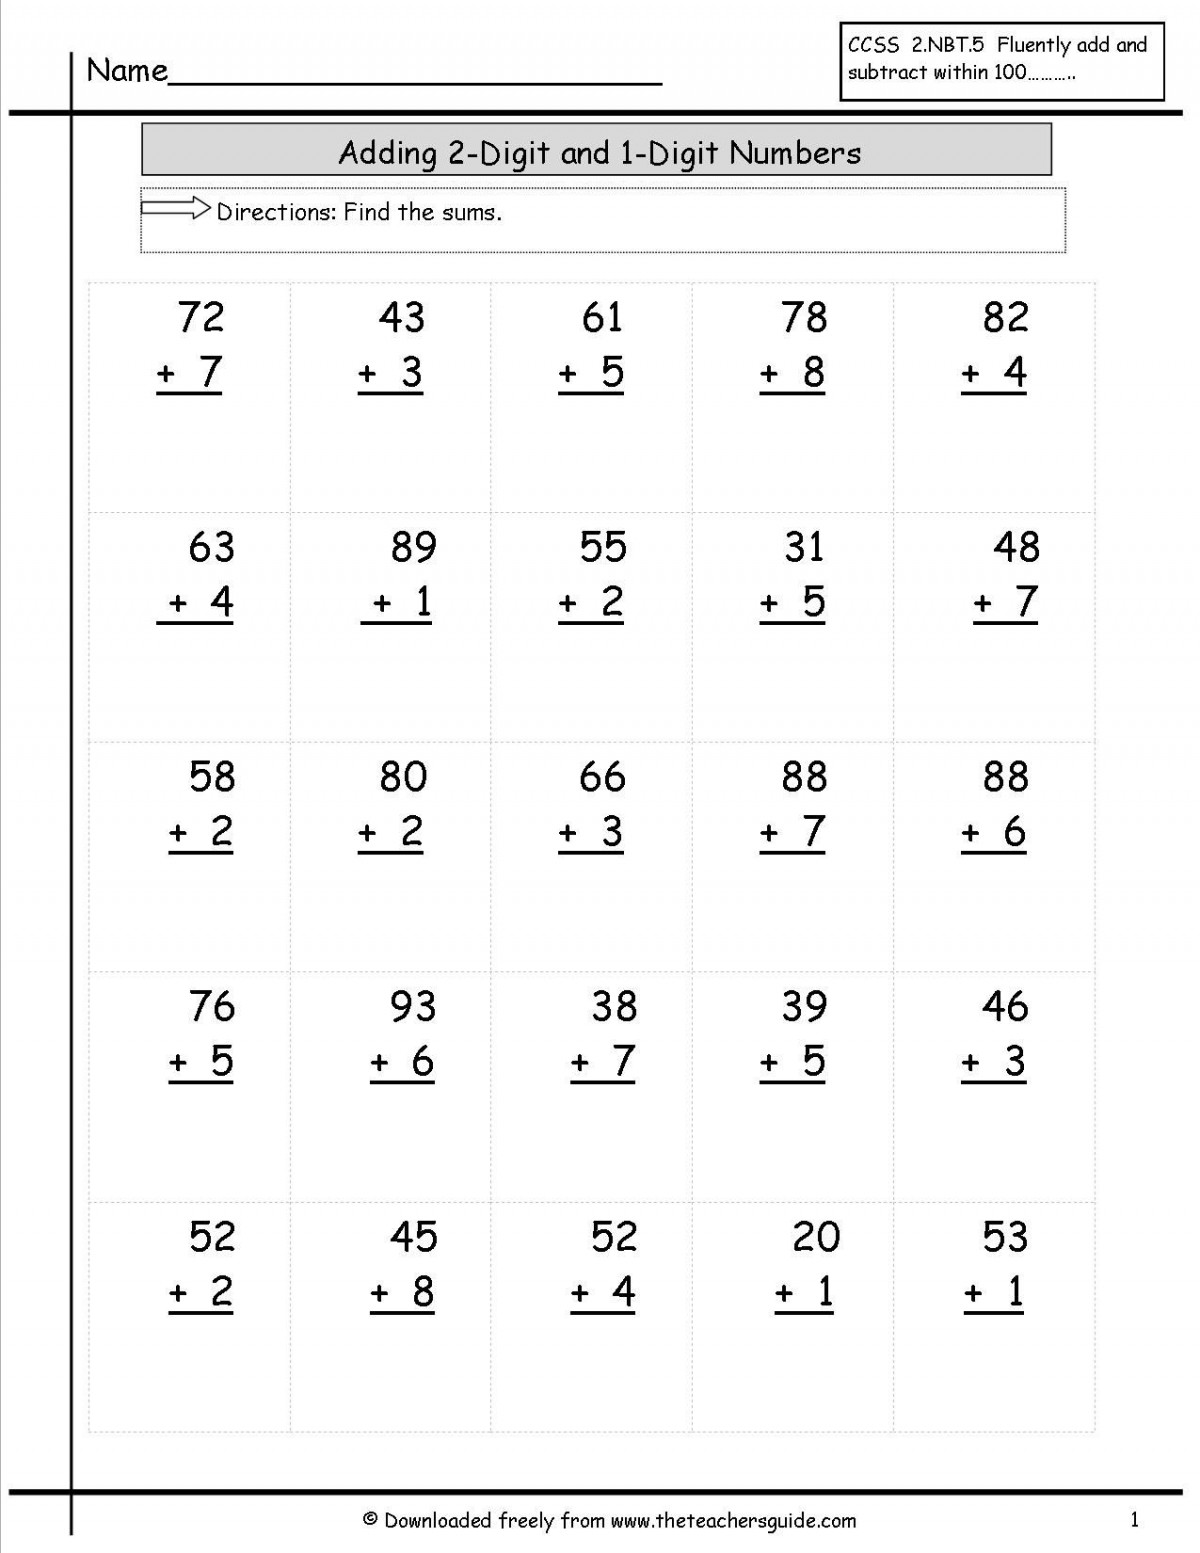 interactive-math-practice-adding-3-digit-and-4-digit-numbers